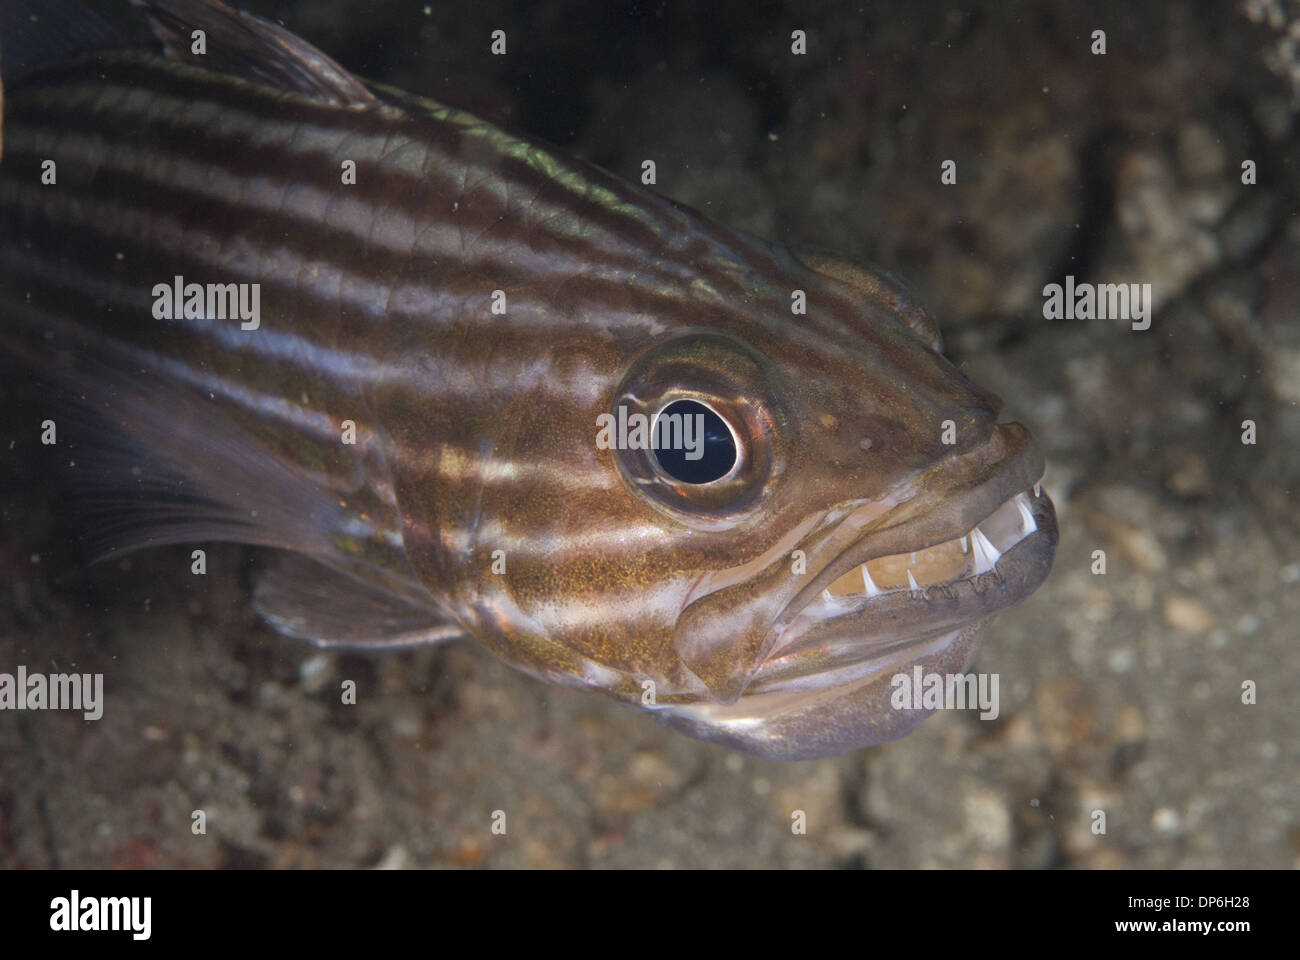 Large-toothed Cardinalfish (Cheilodipterus macrodon) adult male close-up of head mouth brooding eggs Lembeh Straits Sulawesi Stock Photo